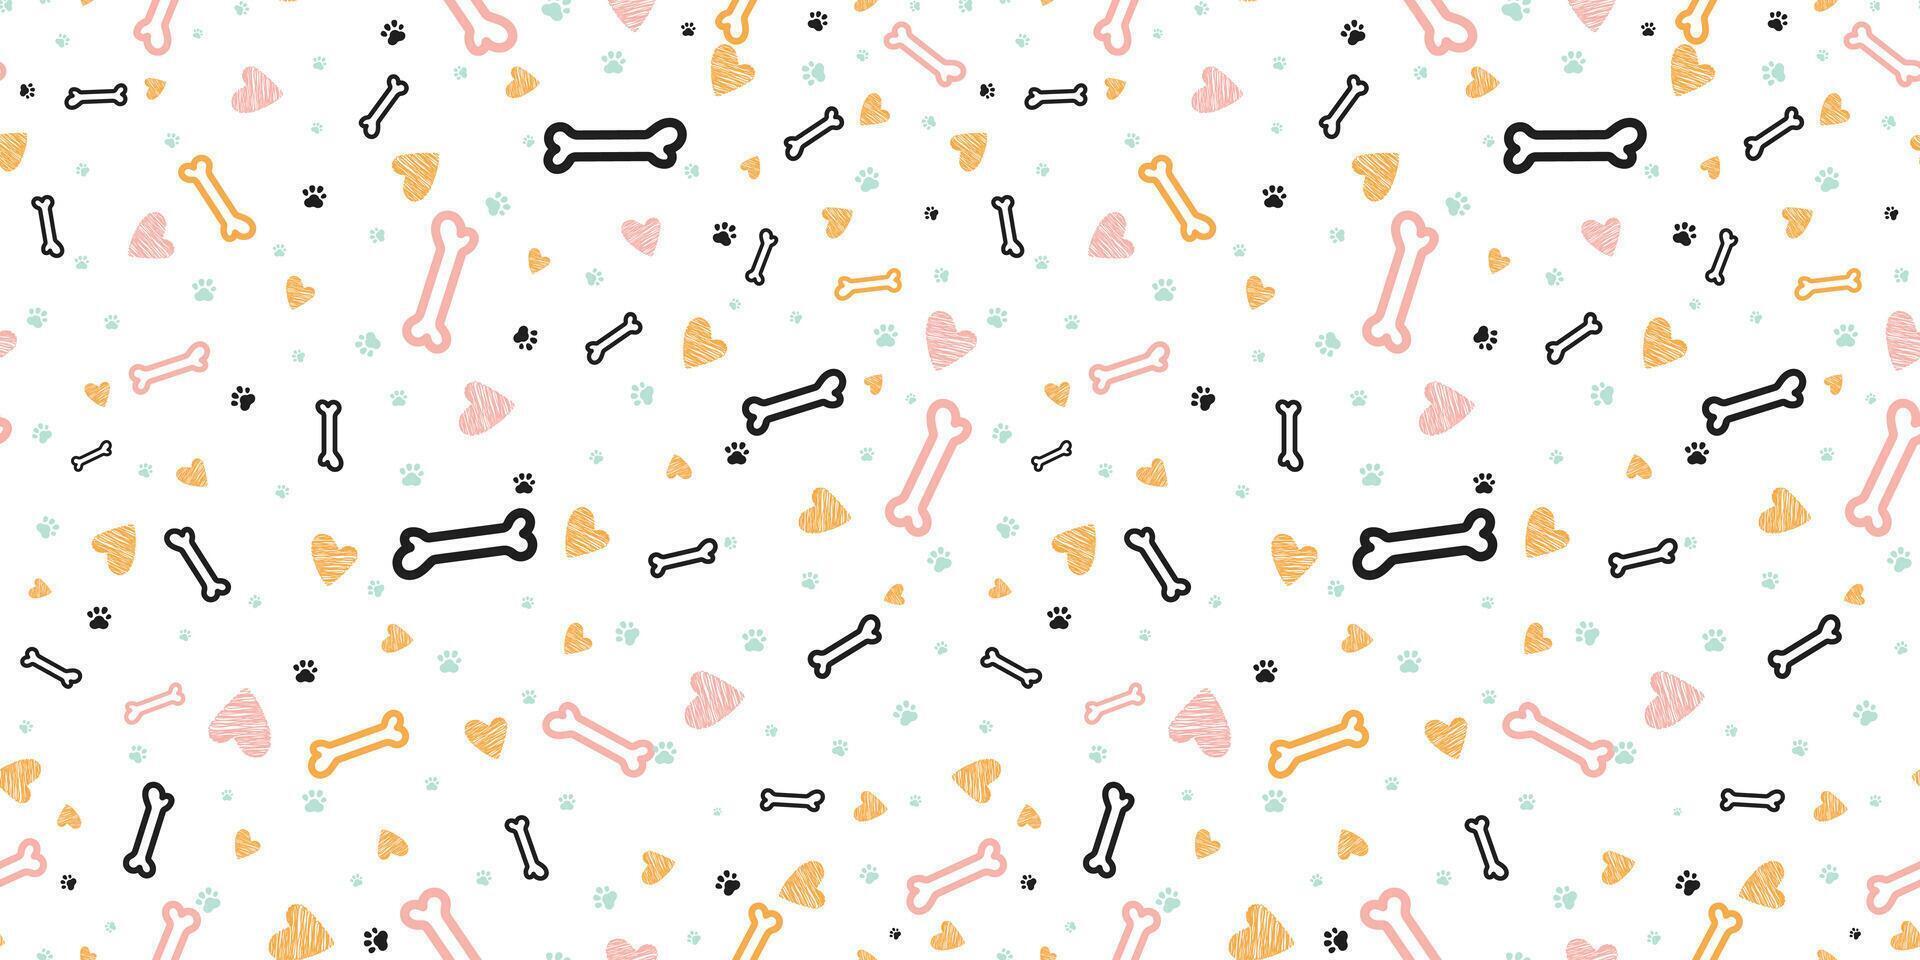 Dog bones seamless pattern Bone and traces of puppy paws repetitive texture Doggy endless background Vector illustration